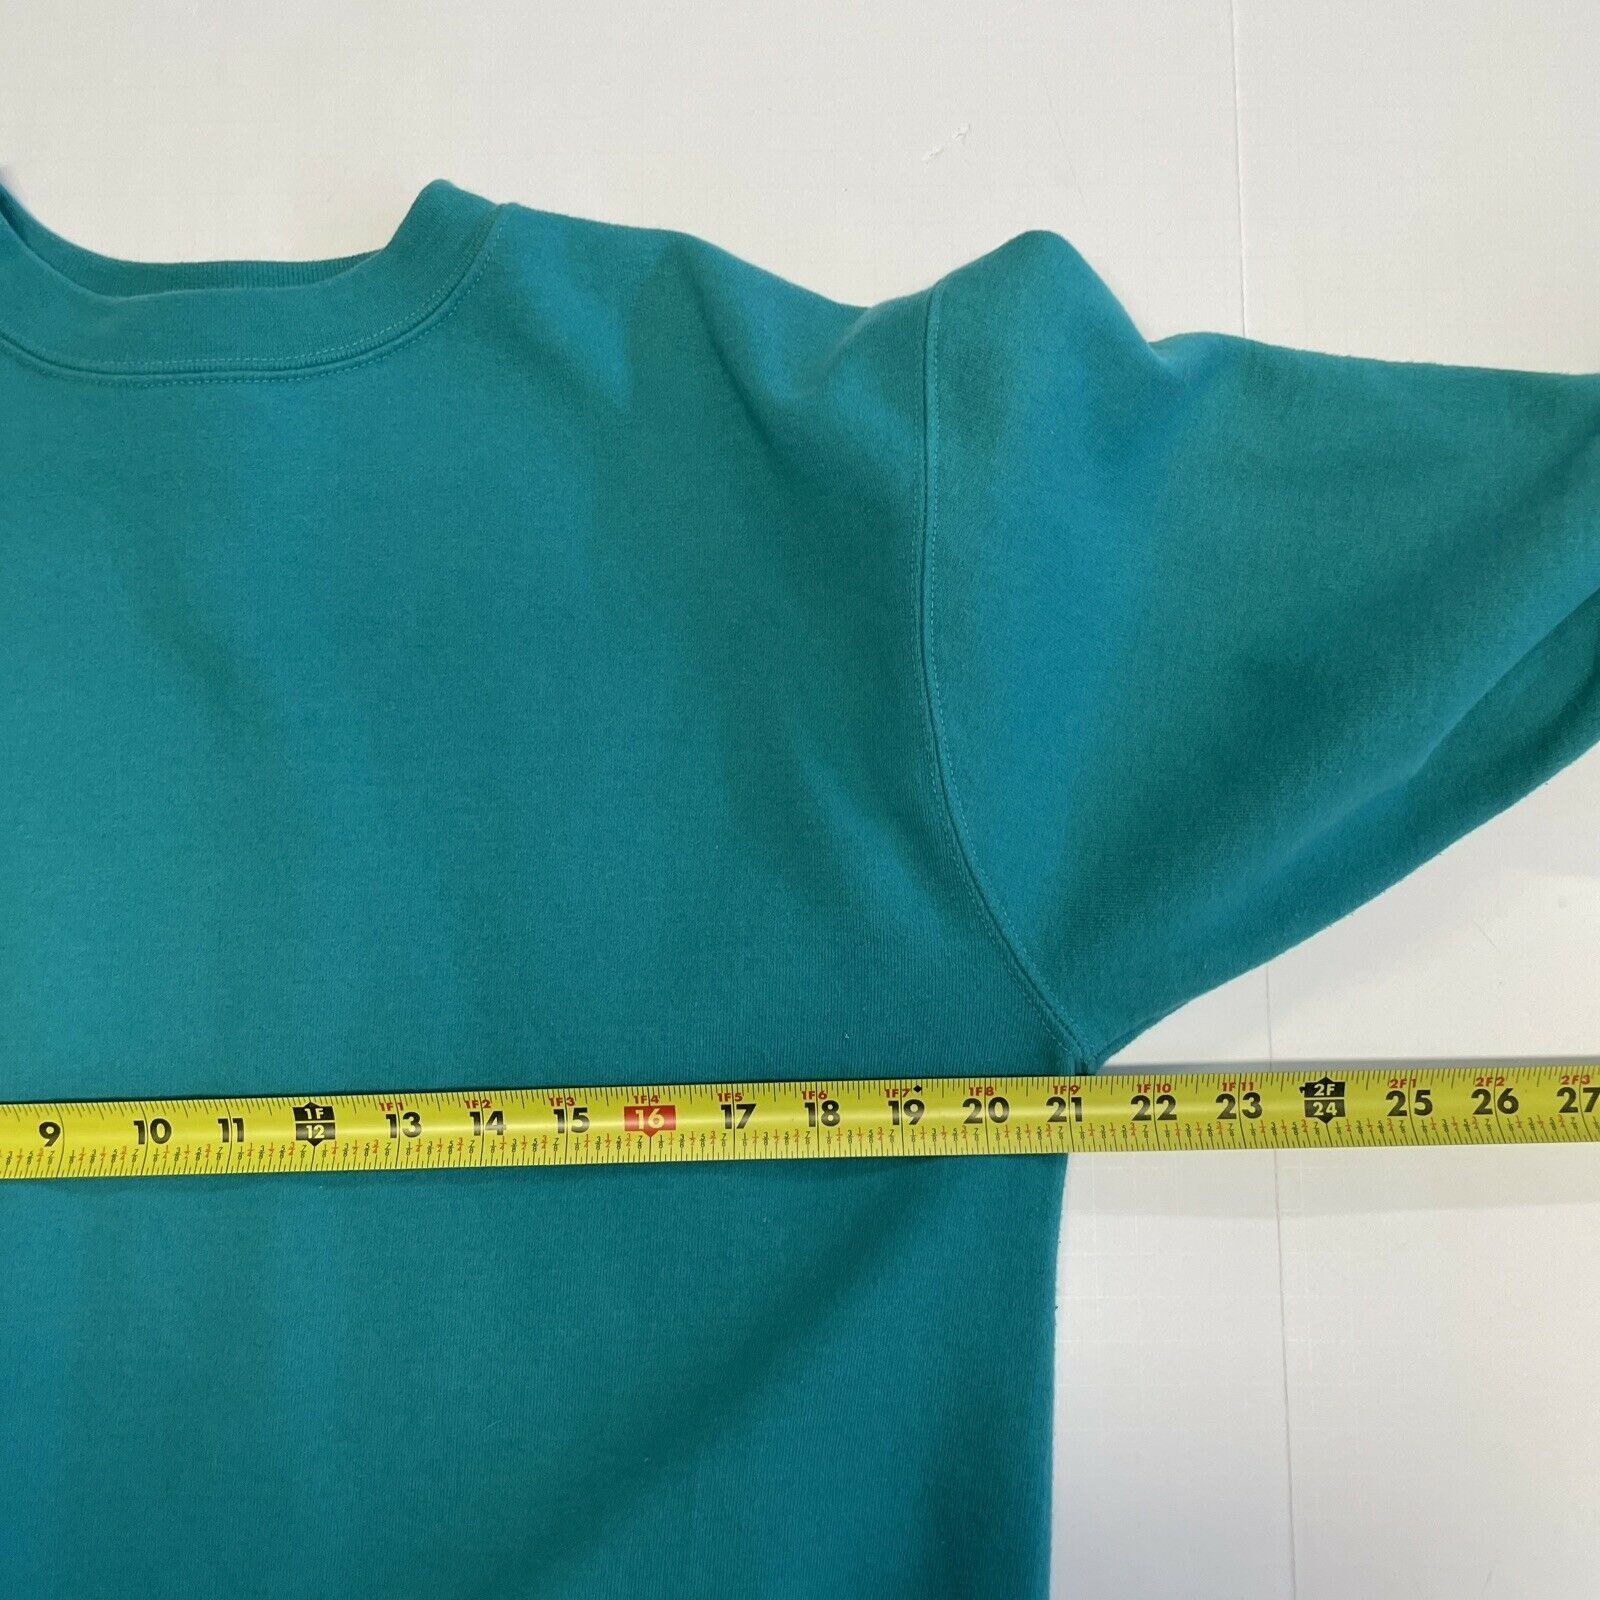 Champion Champion ECO Blank Pullover Sweatshirt Solid Teal Stained M Size US M / EU 48-50 / 2 - 4 Thumbnail